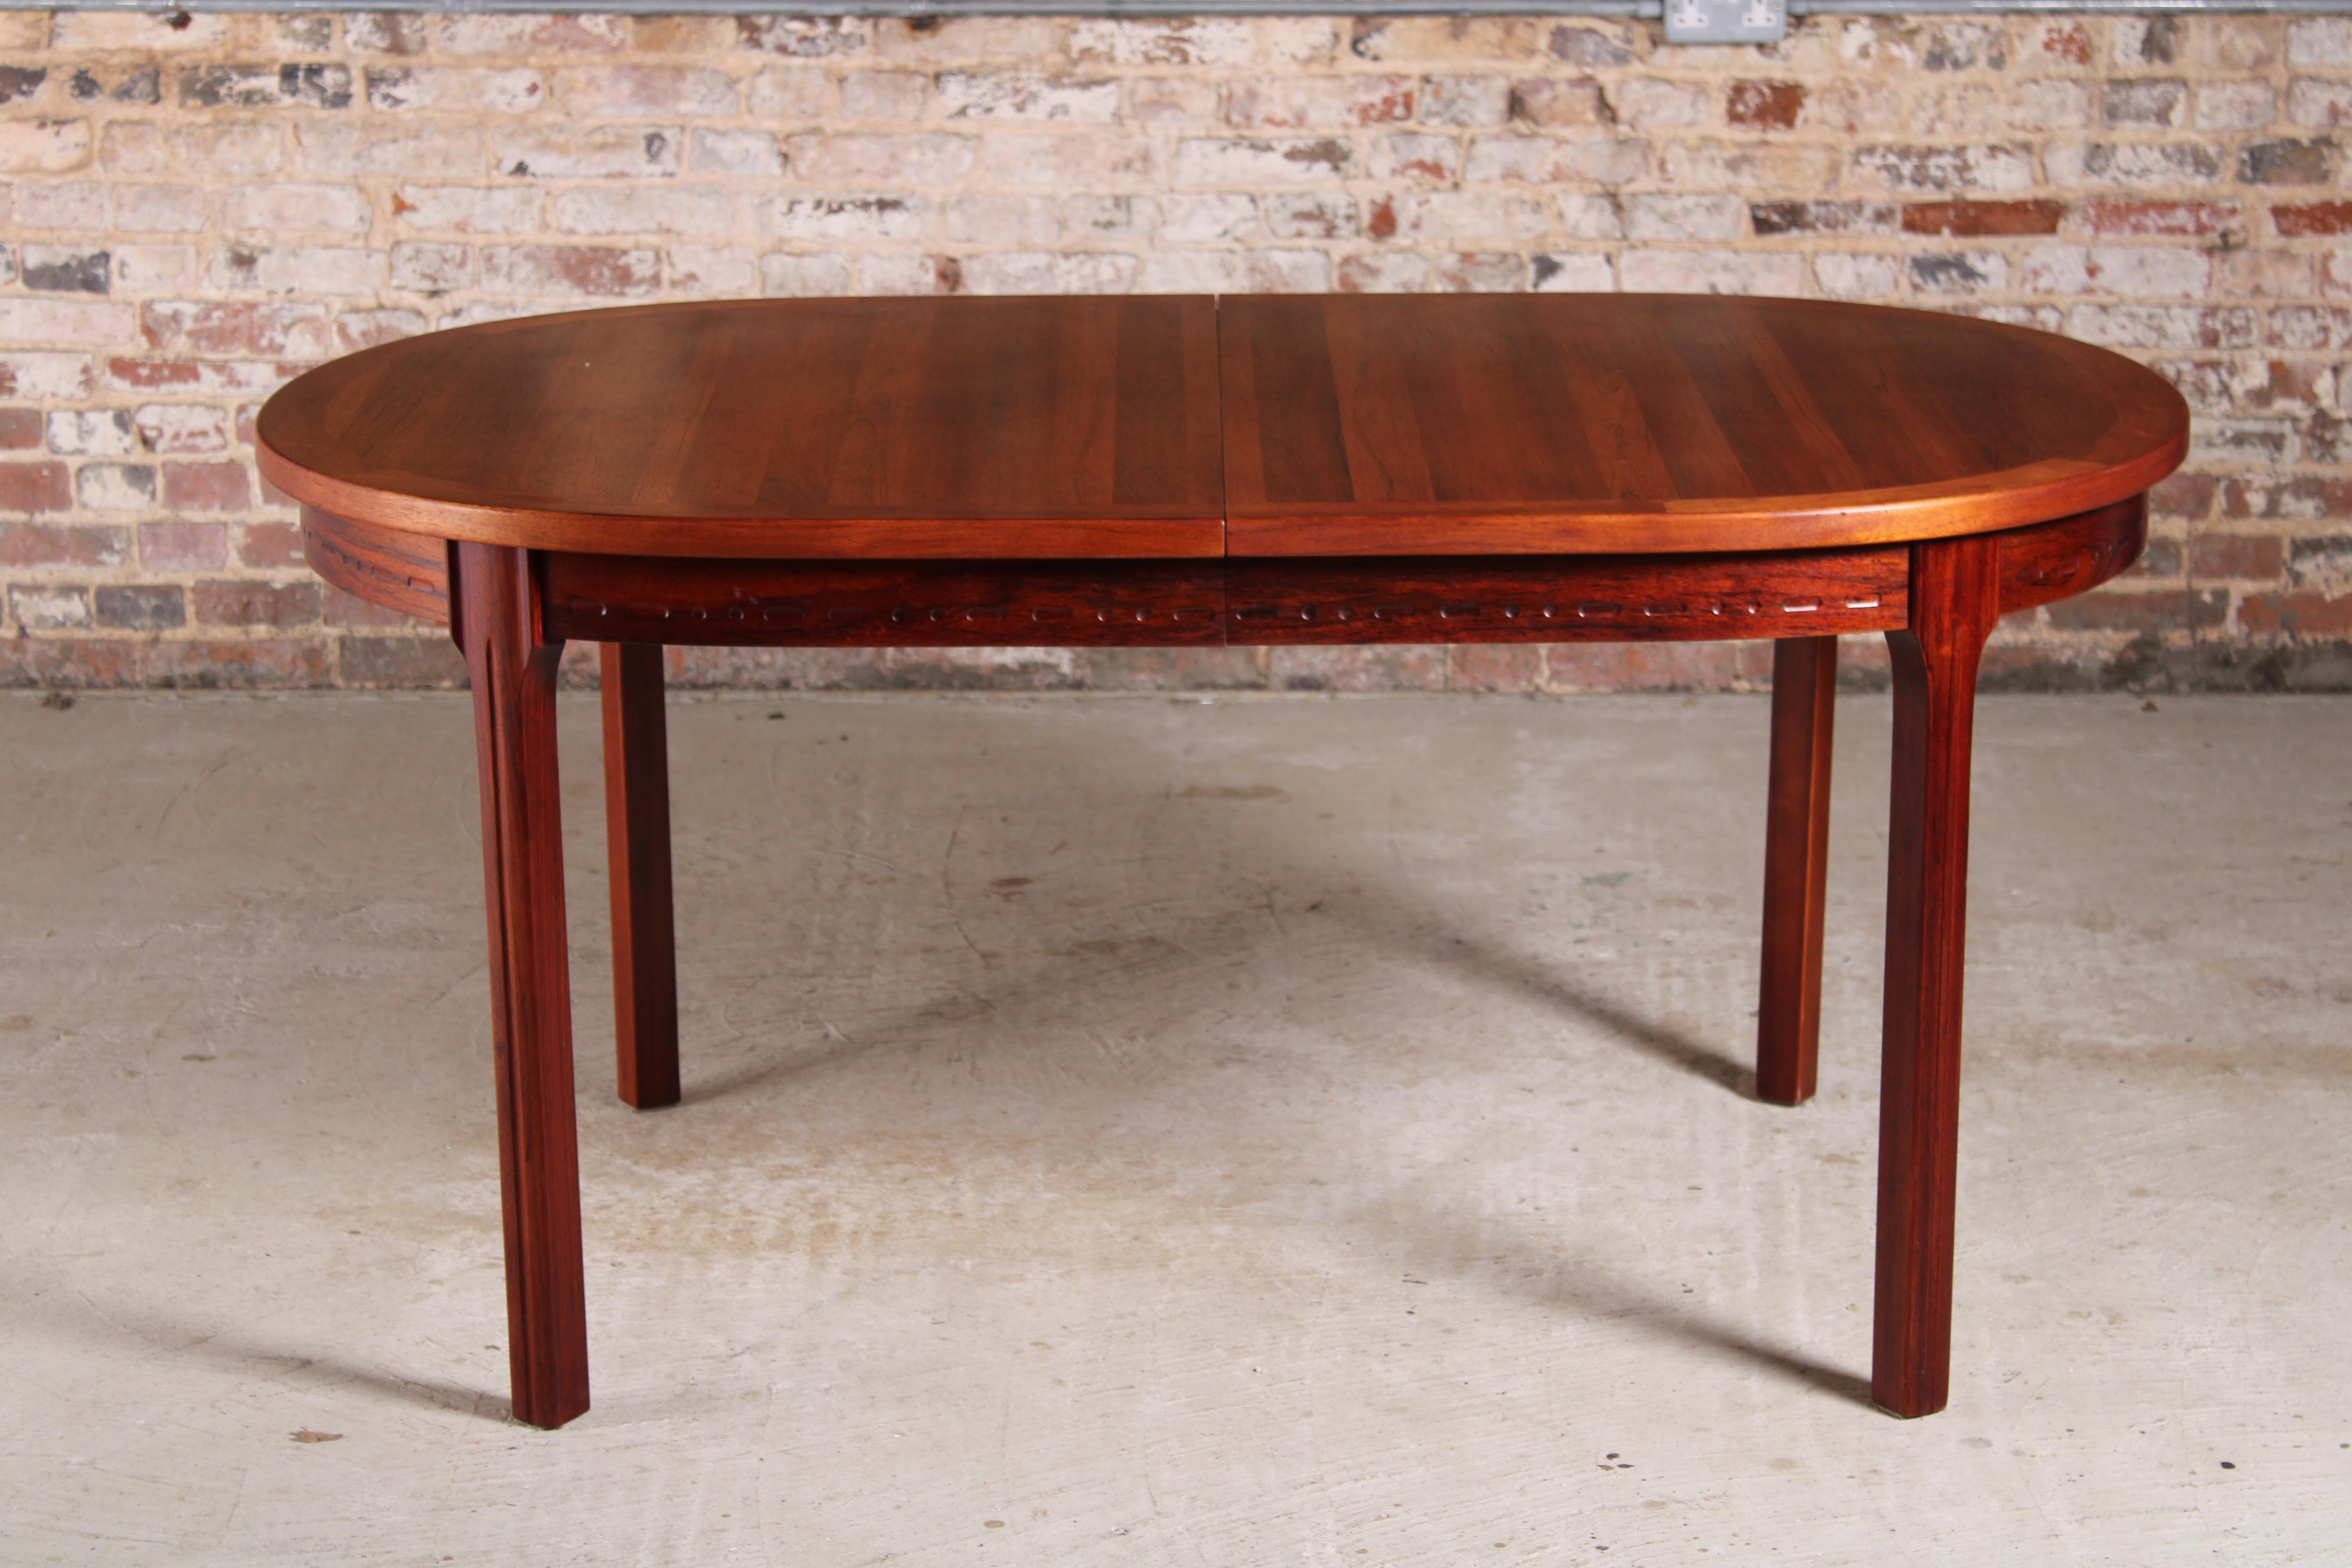 Swedish Mid Century rosewood dining table by Nils Jonsson for Troeds, circa 1970s. 2 extension leaves stored underneath. Extends to 266cm and seats up to 12 people. 

Measures: W 156/211/266cm
D 100cm
H 73cm.